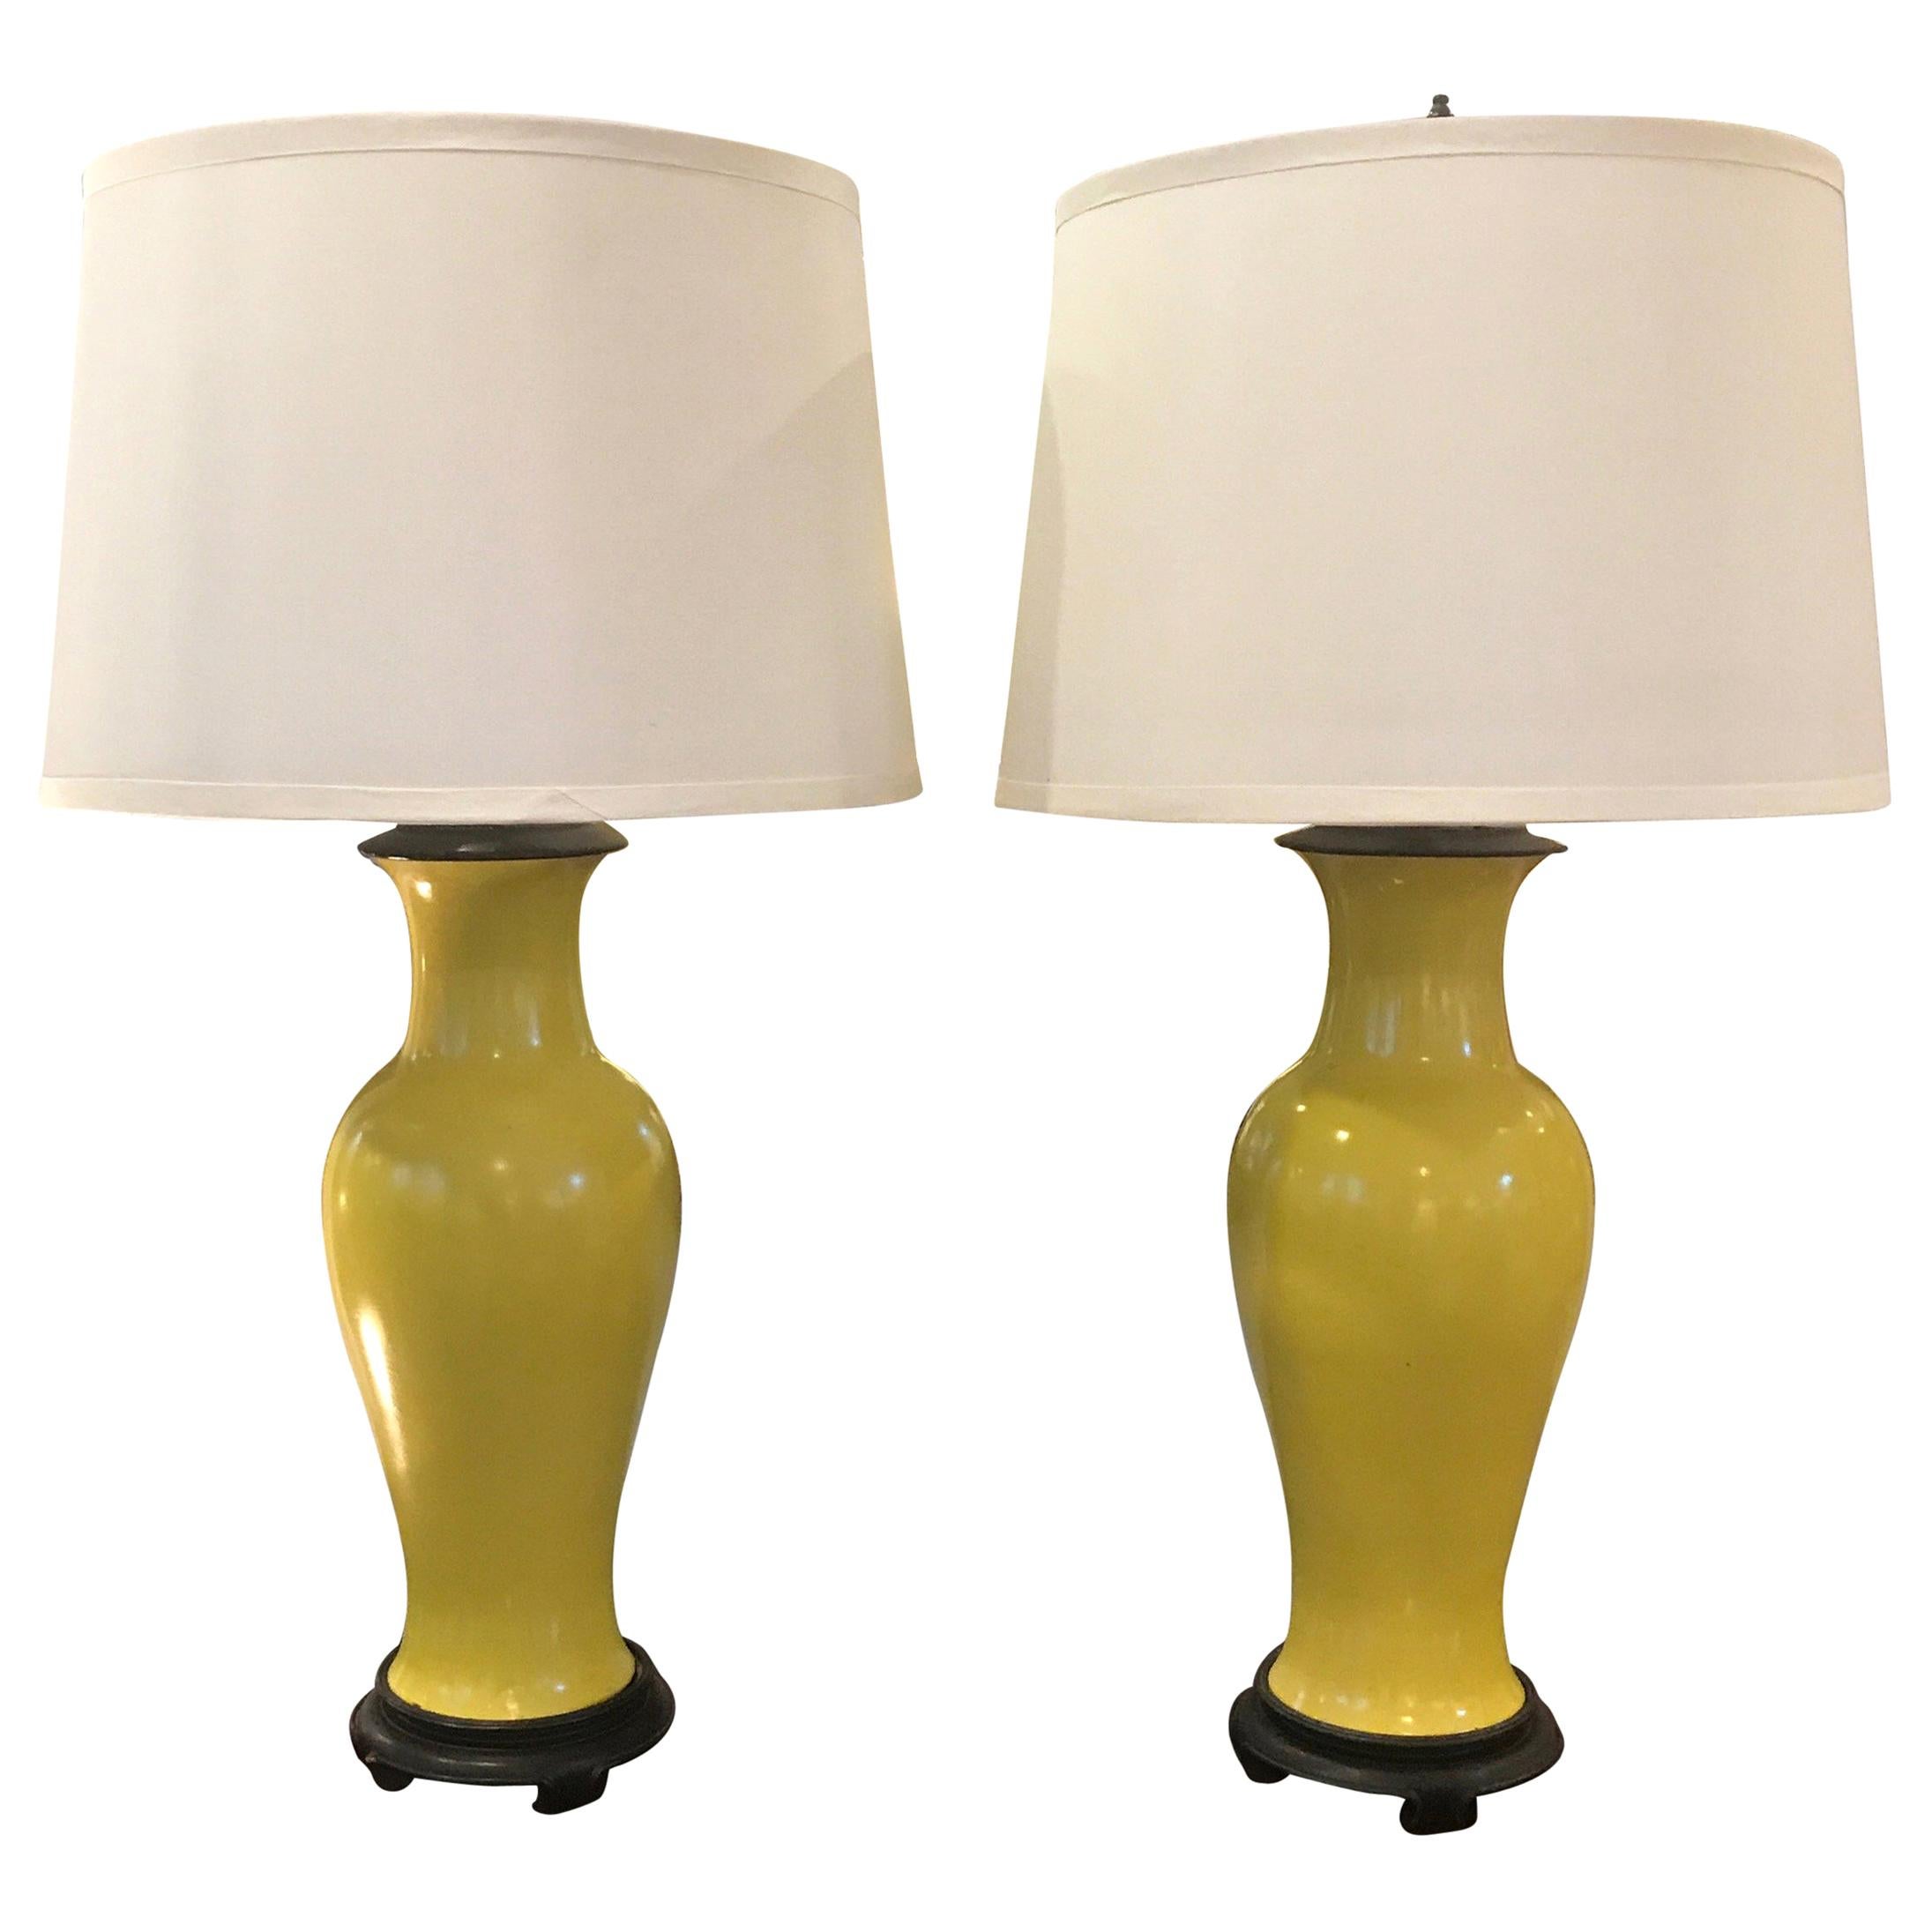 Pair of Imperial Yellow Chinese Porcelain Lamps